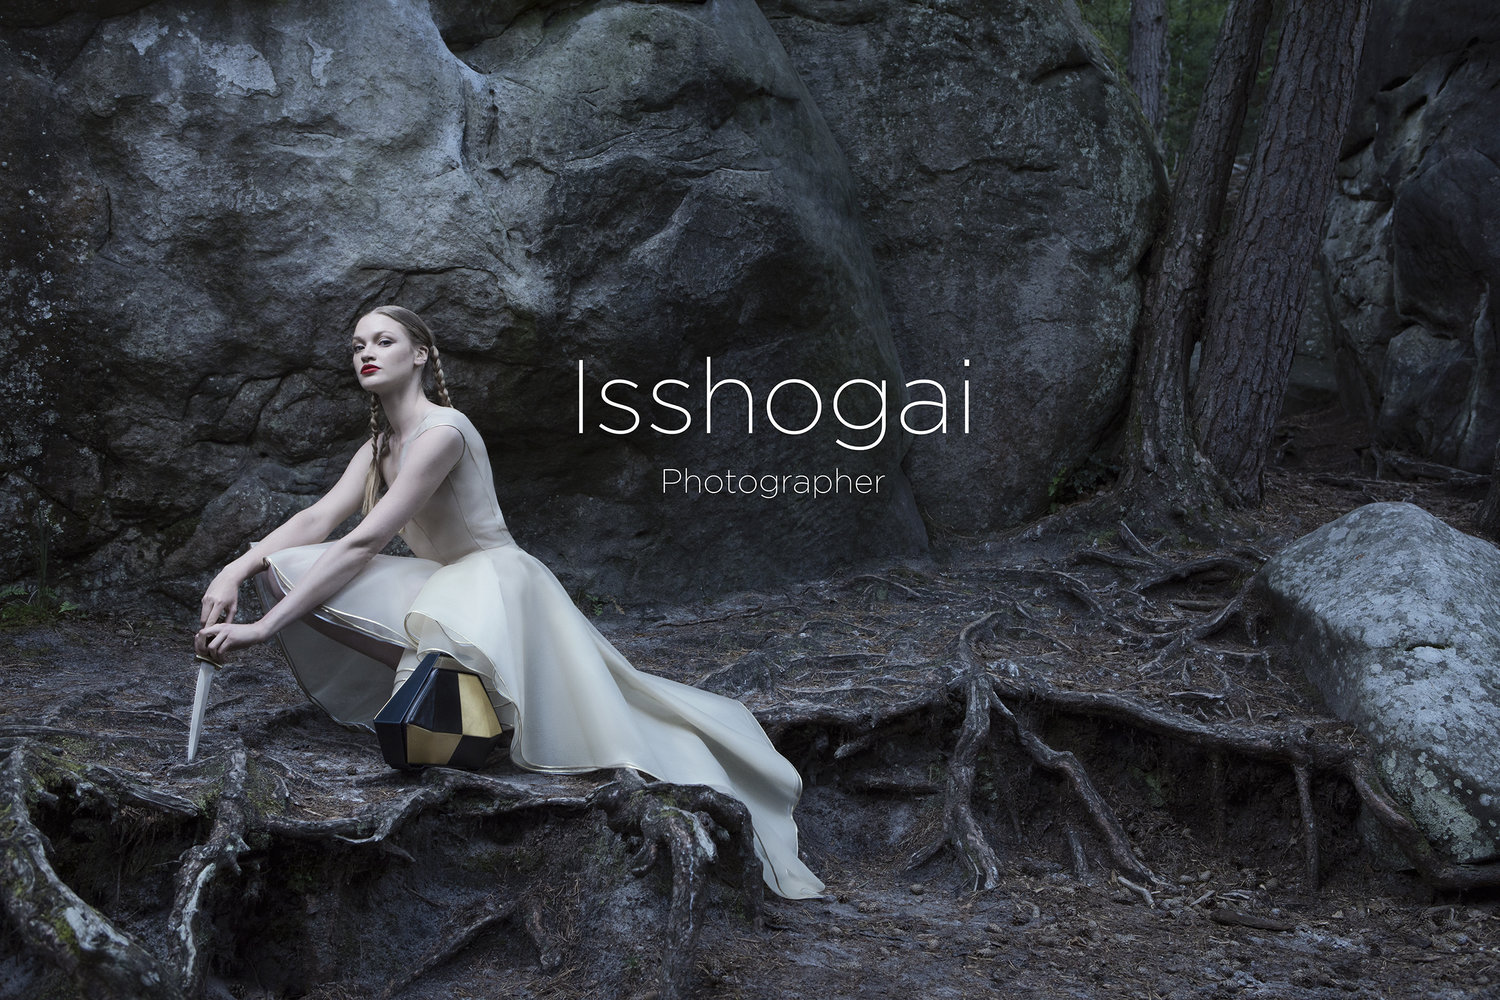 Introducing ISSHOGAI (for the life) — LINDA THOMSEN